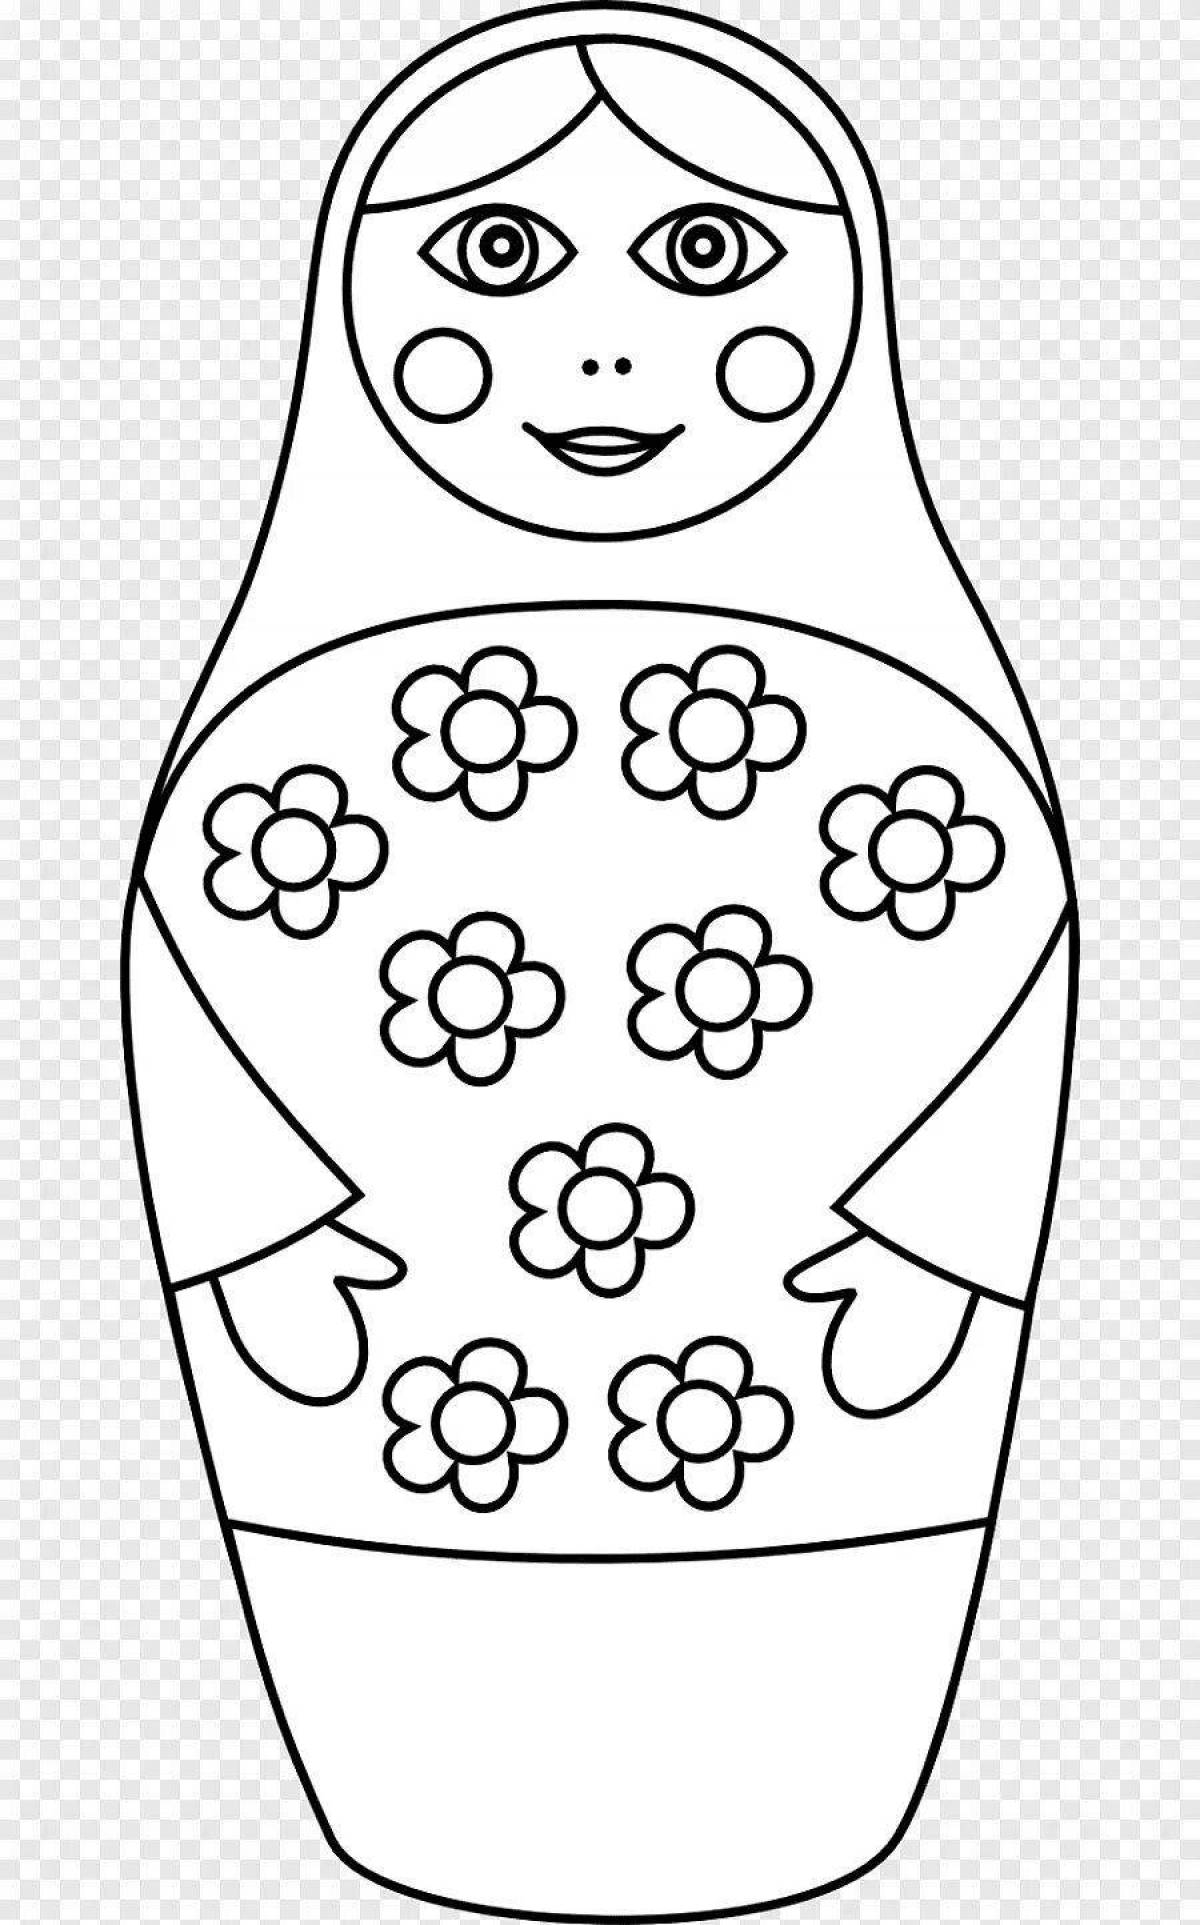 Merry matryoshka coloring book for children 3-4 years old